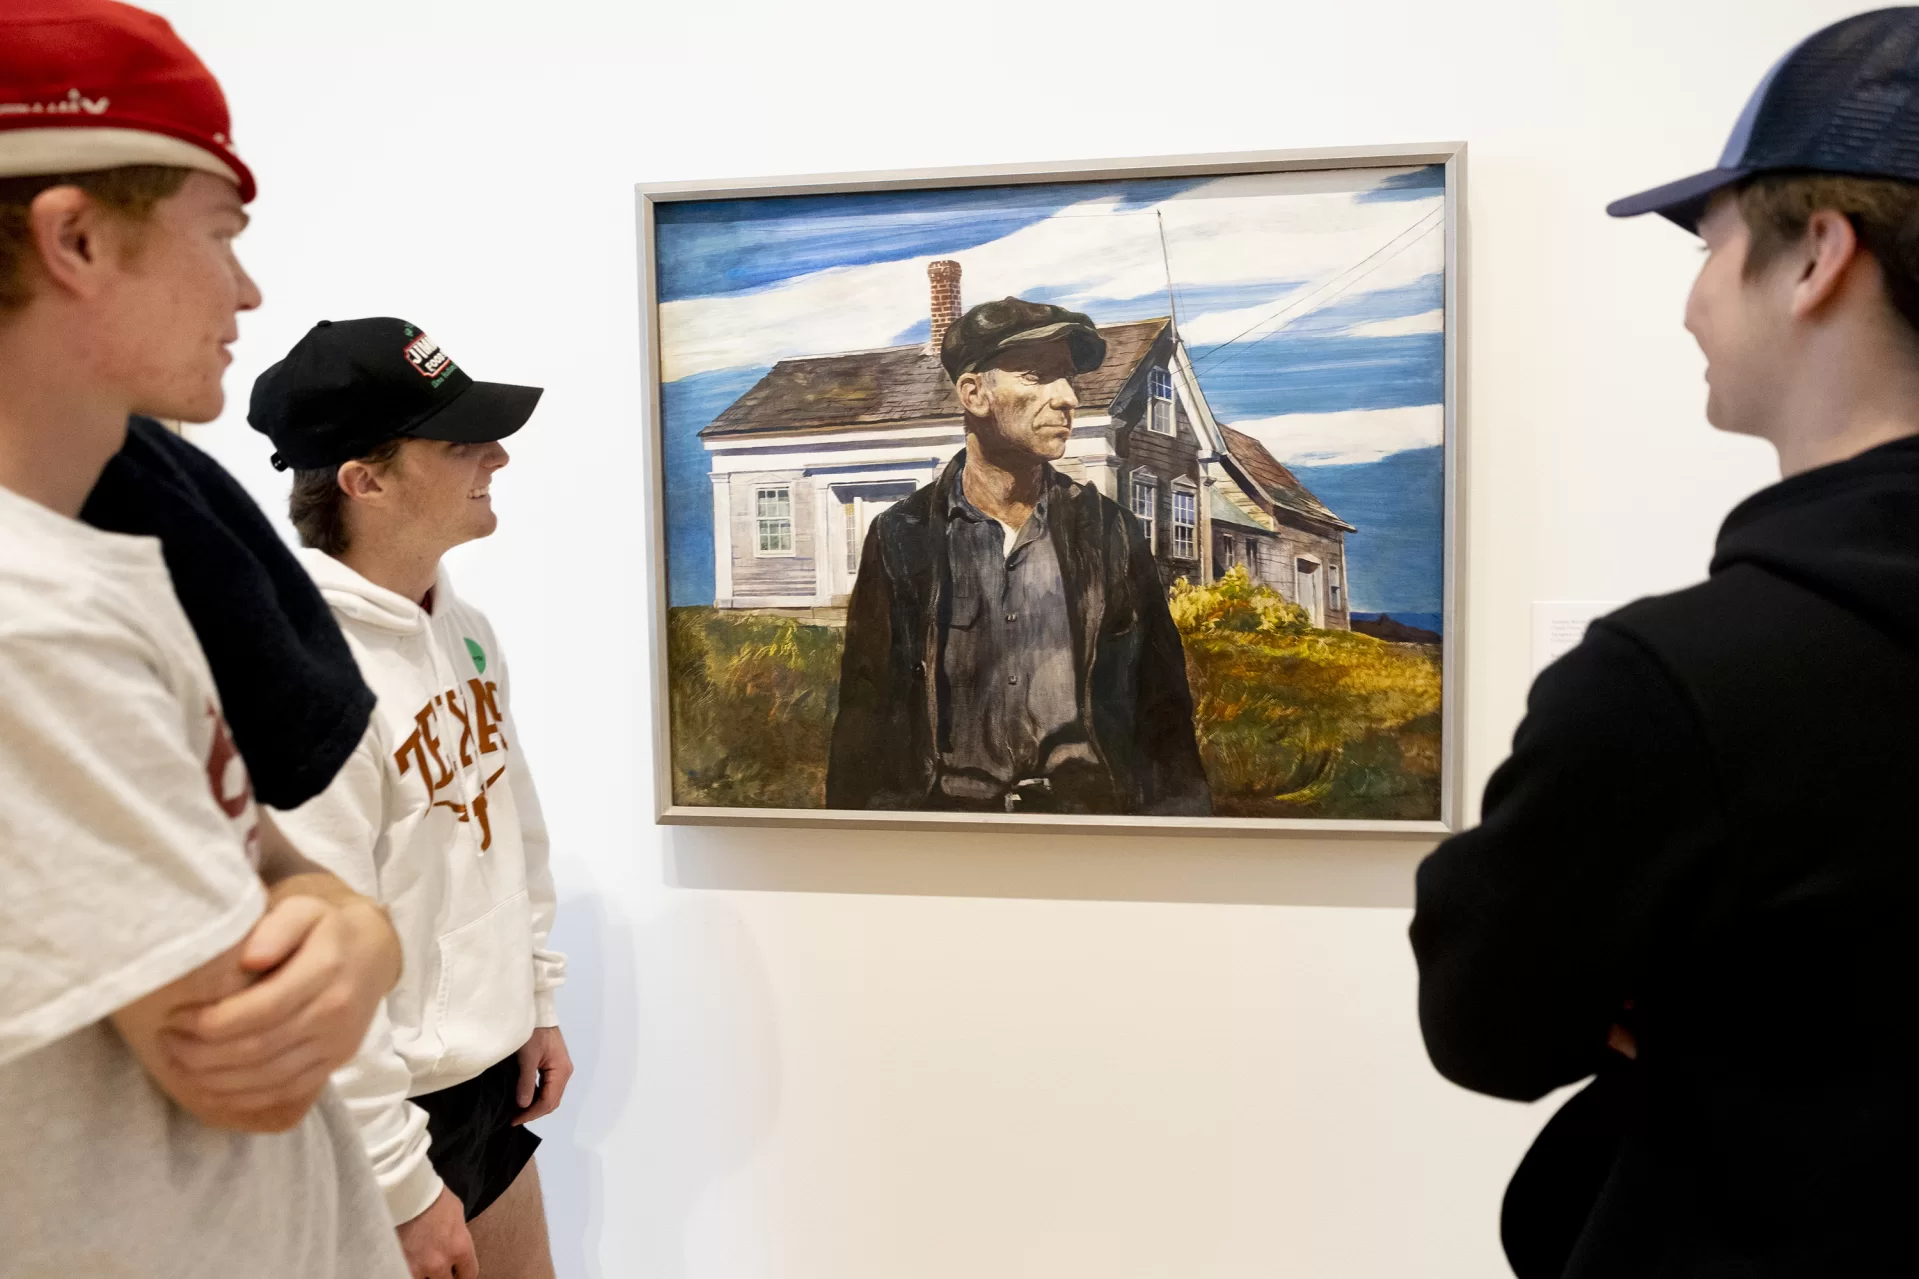 An early work of Andrew Wyeth’s, Charlie Ervine (1937, tempera on panel) captures the attention of Josh Smith of Farmington, Maine, Joe Yoxall ’26 of Dallas, and Liam Shlager of Ross, Calif. (Phyllis Graber Jensen/Bates College)